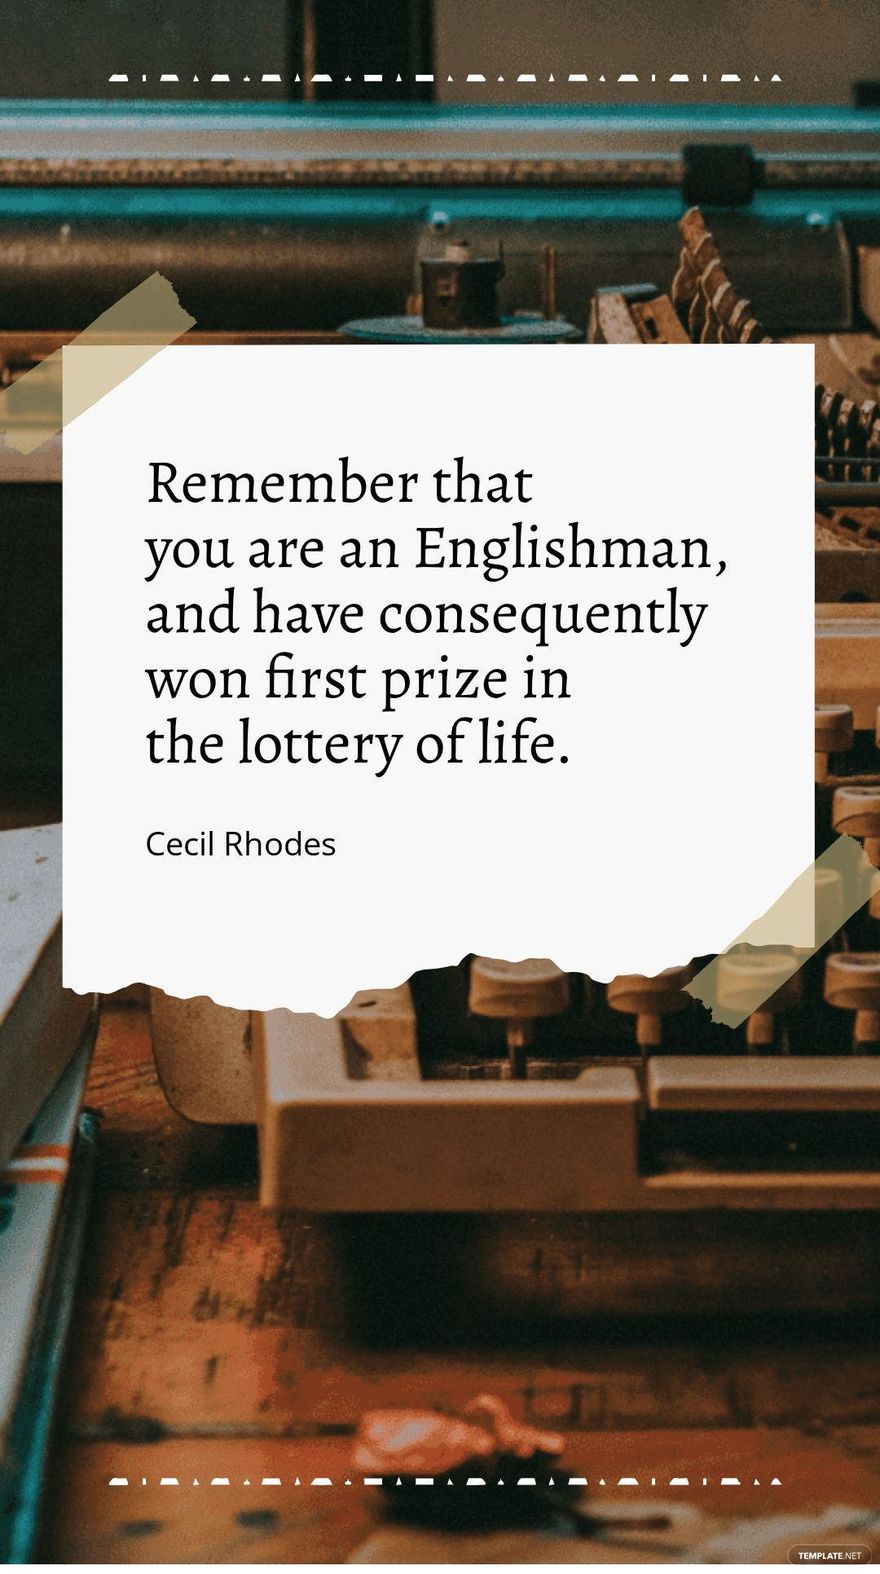 Cecil Rhodes - Remember that you are an Englishman, and have consequently won first prize in the lottery of life.